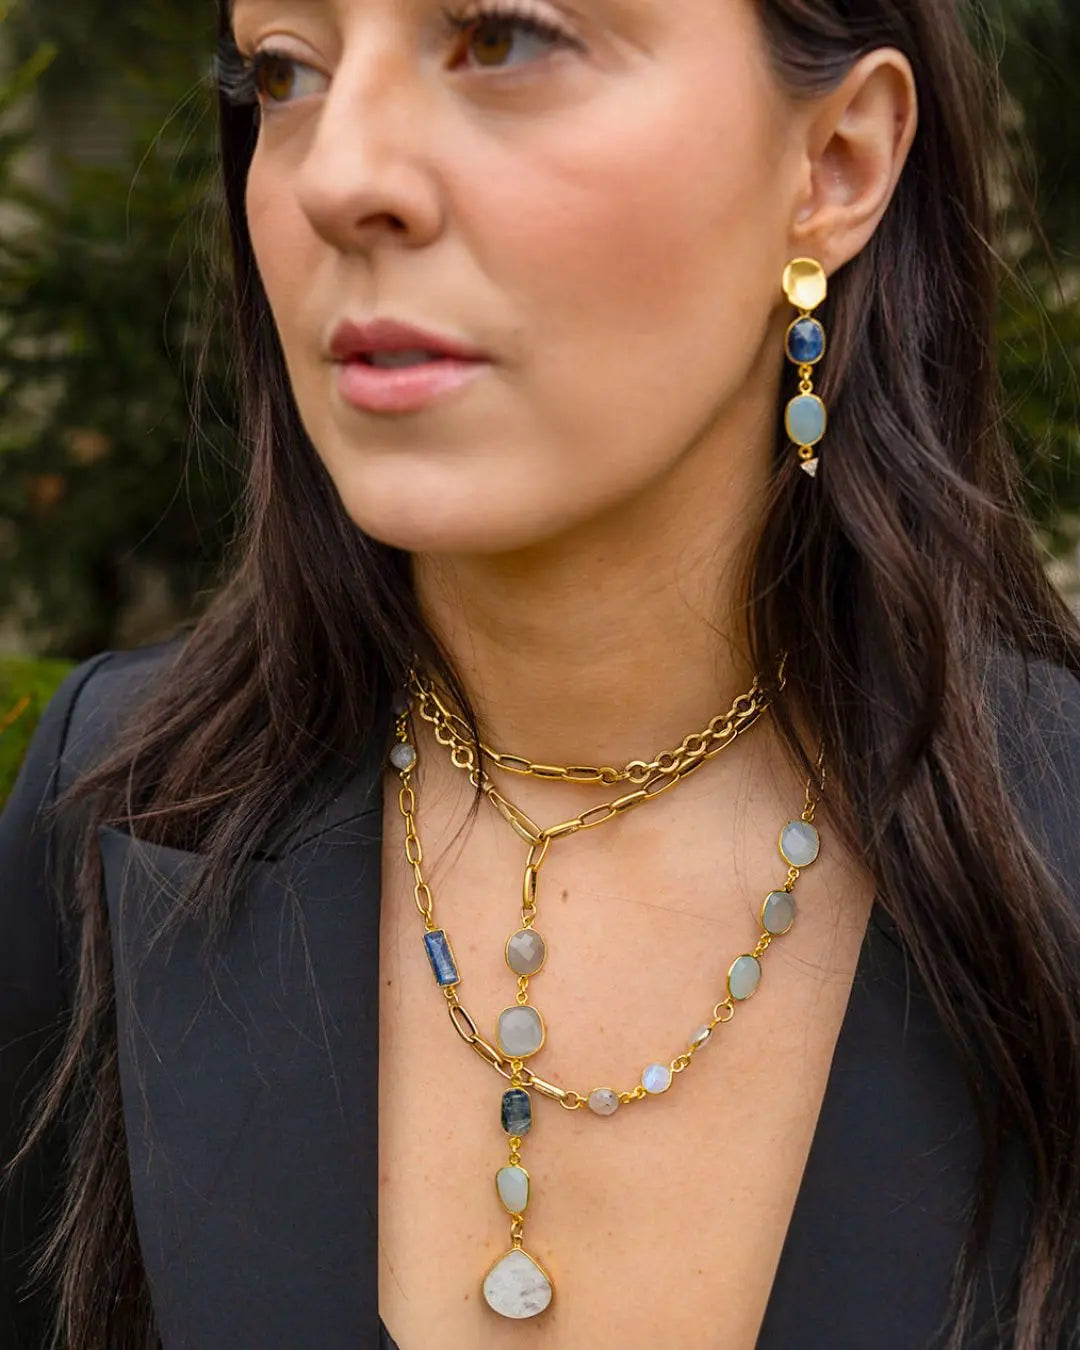 Model showcasing Loni Paul affordable luxury jewelry, featuring a stunning gemstone necklace and earrings crafted with high quality materials.